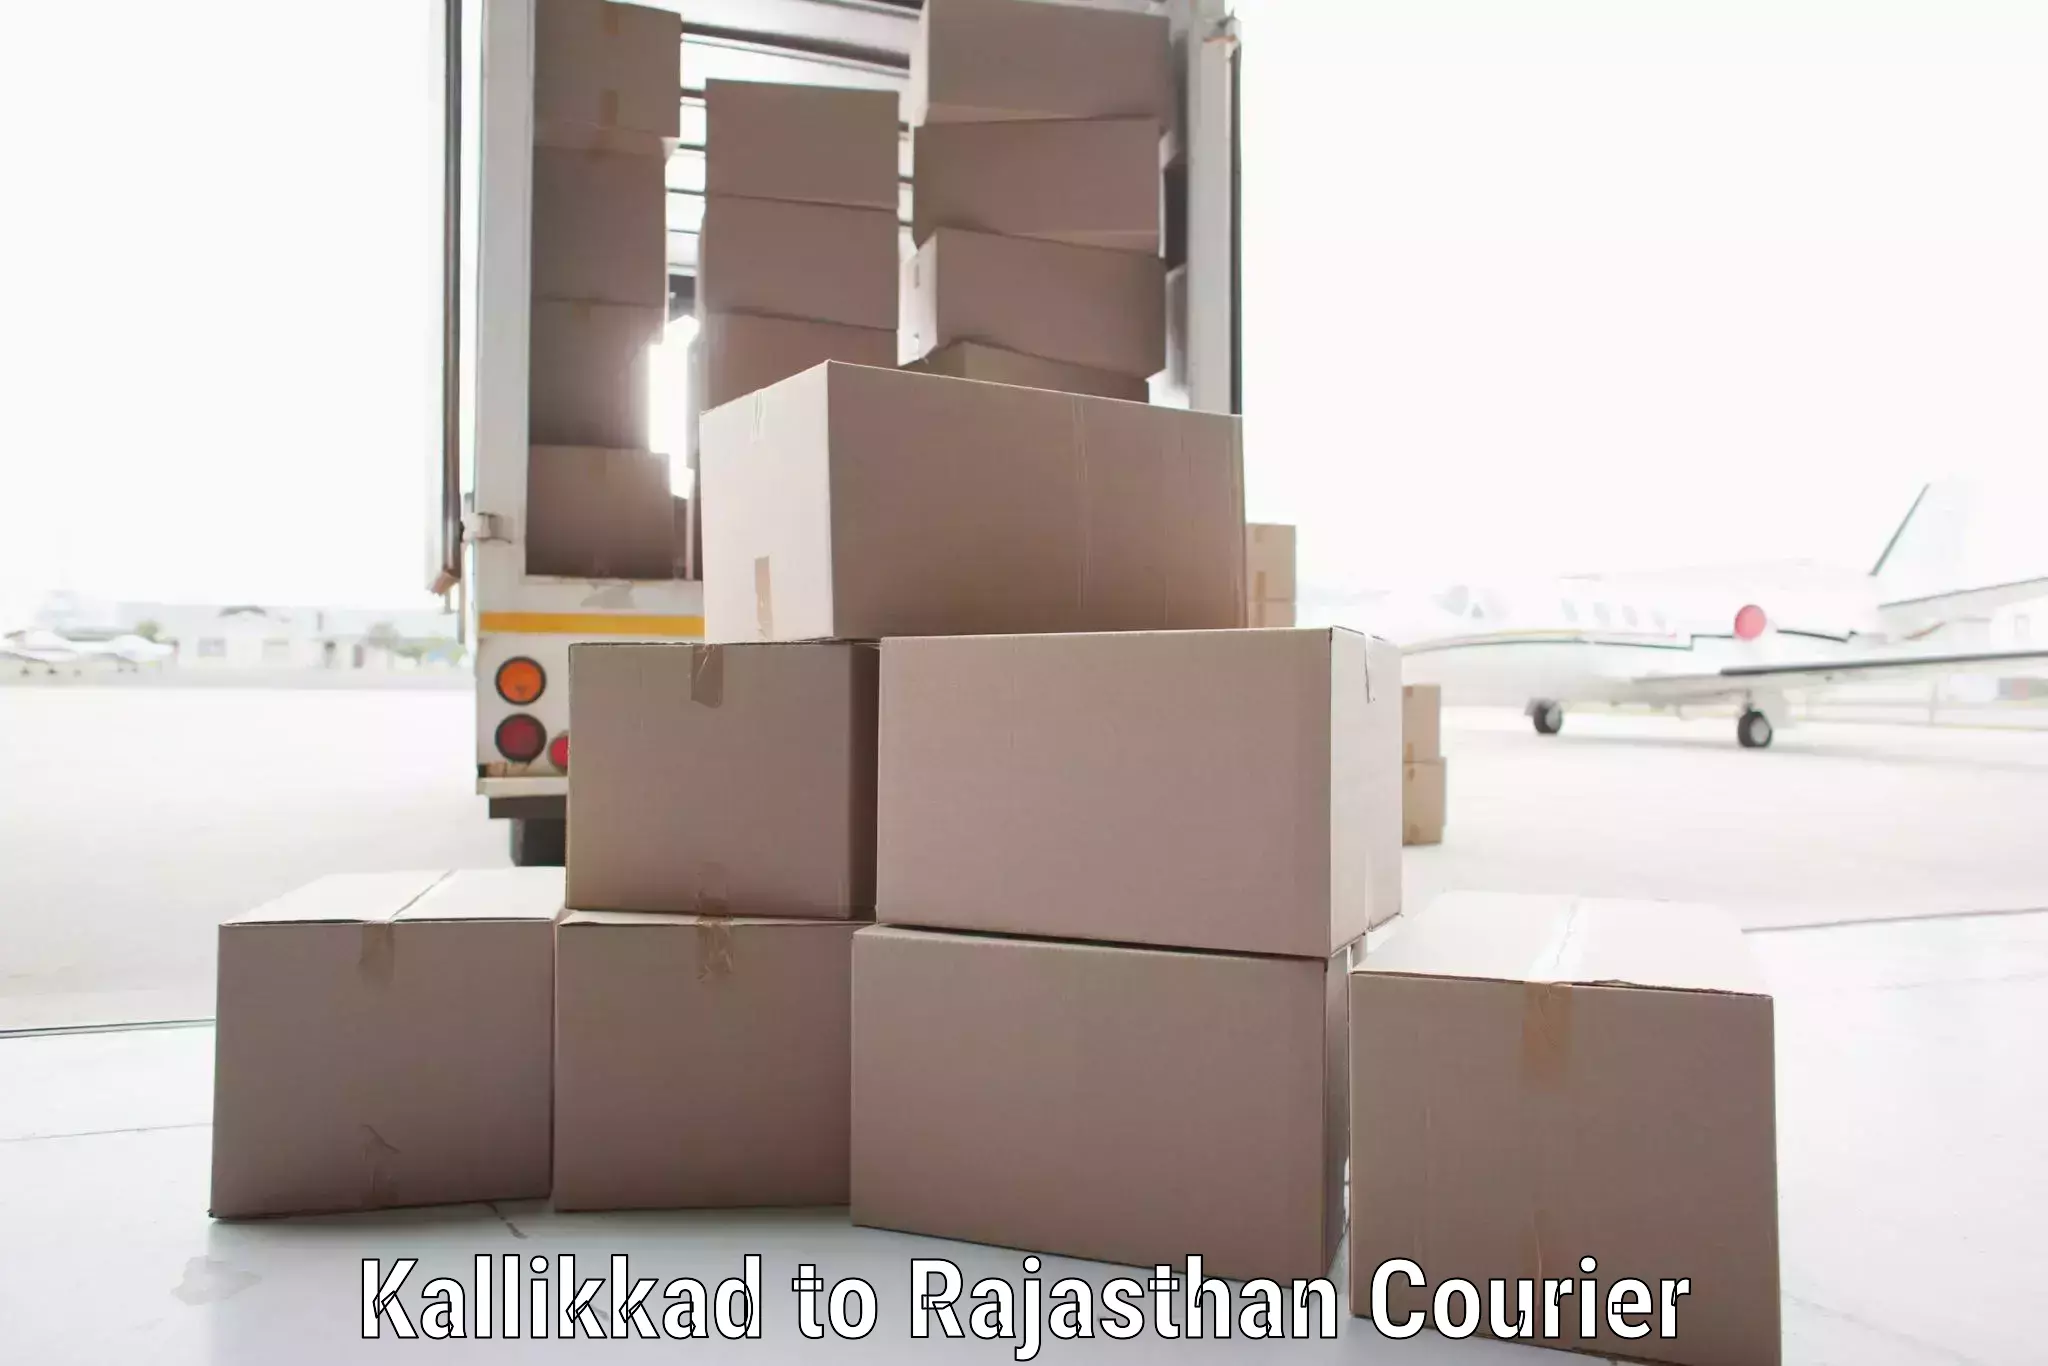 Multi-national courier services Kallikkad to Yeswanthapur